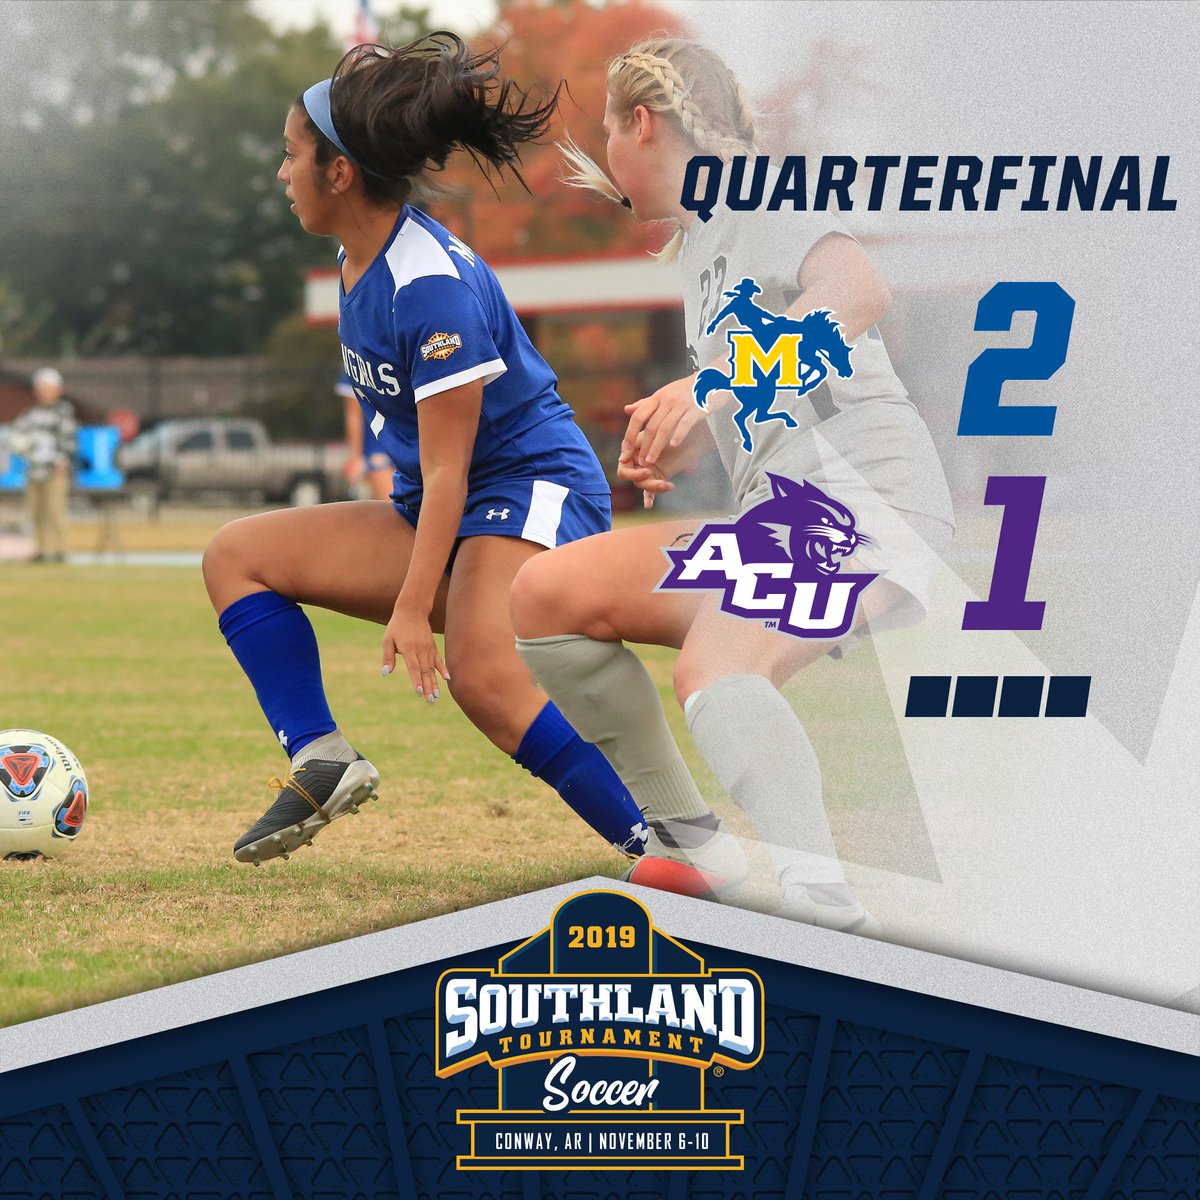 🚨UPSET ALERT🚨 There will be a new champion in 2019 as No. 6 @McNeeseSoccer eliminates defending tournament champs and No. 3 @ACU_Soccer. #SouthlandStrong #GeauxPokes